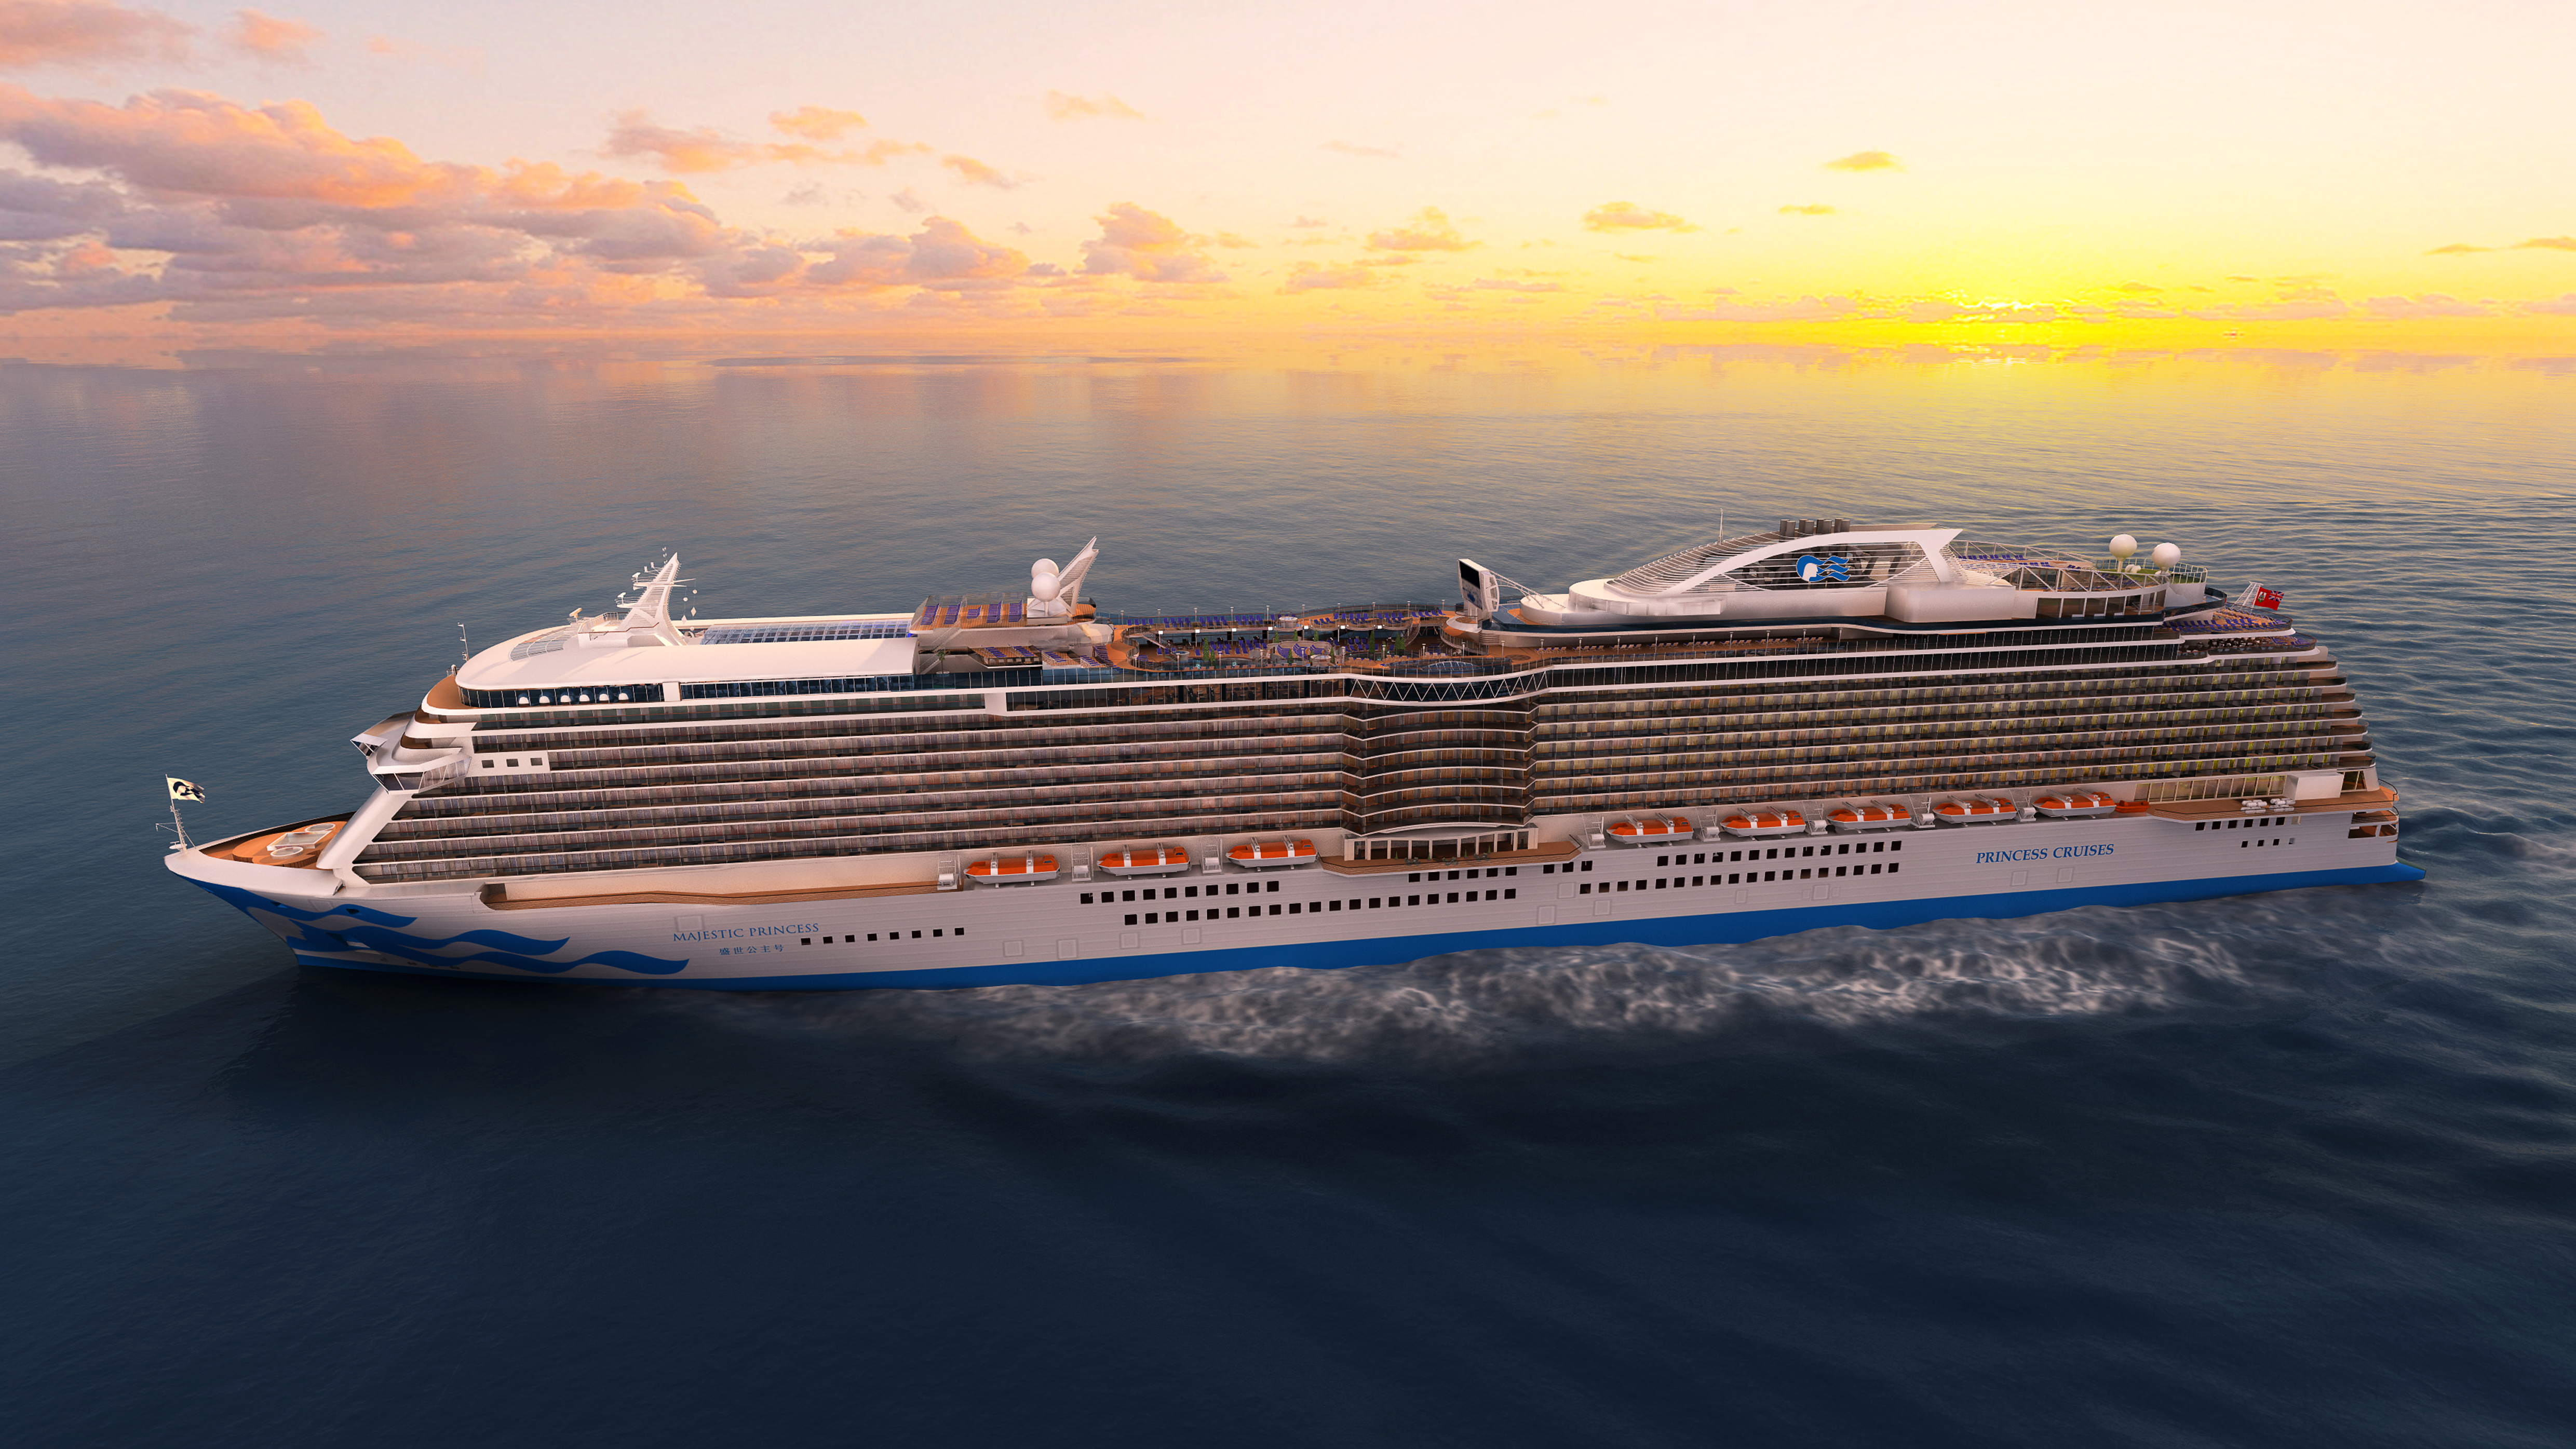 Amazing Majestic Princess Pictures & Backgrounds